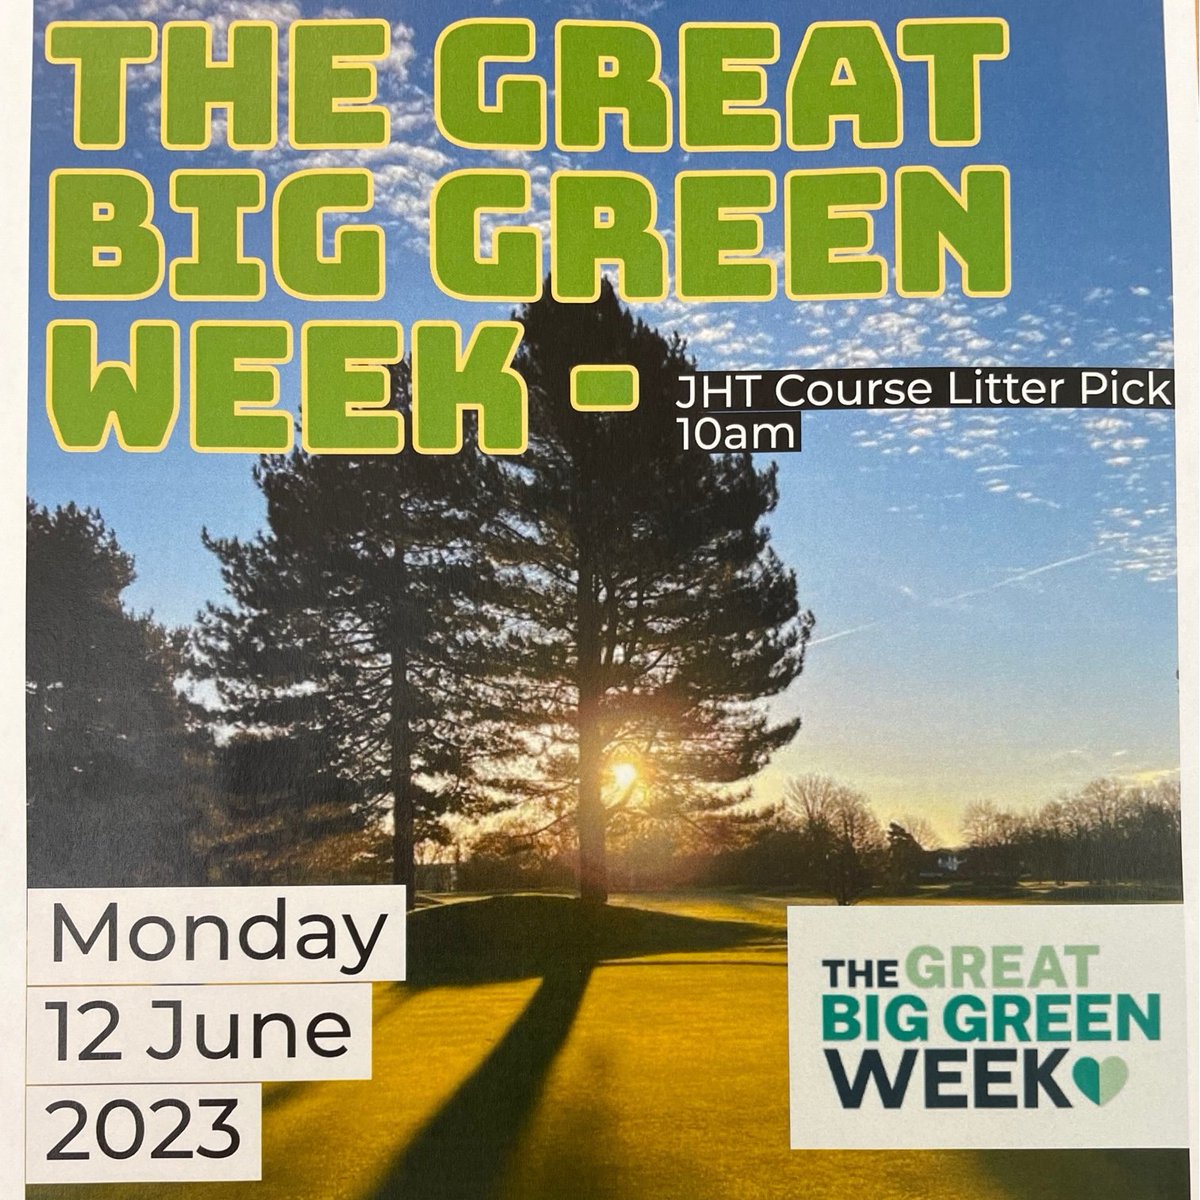 Ready for Great Big Green Week? We started early welcoming @ThamesLandscape Strategy and their volunteers carrying out habitat management on invasive species.  Member & staff litter pick also happening on Monday.  What will you do? #getinvolved #richmondGBGW #community #habitats